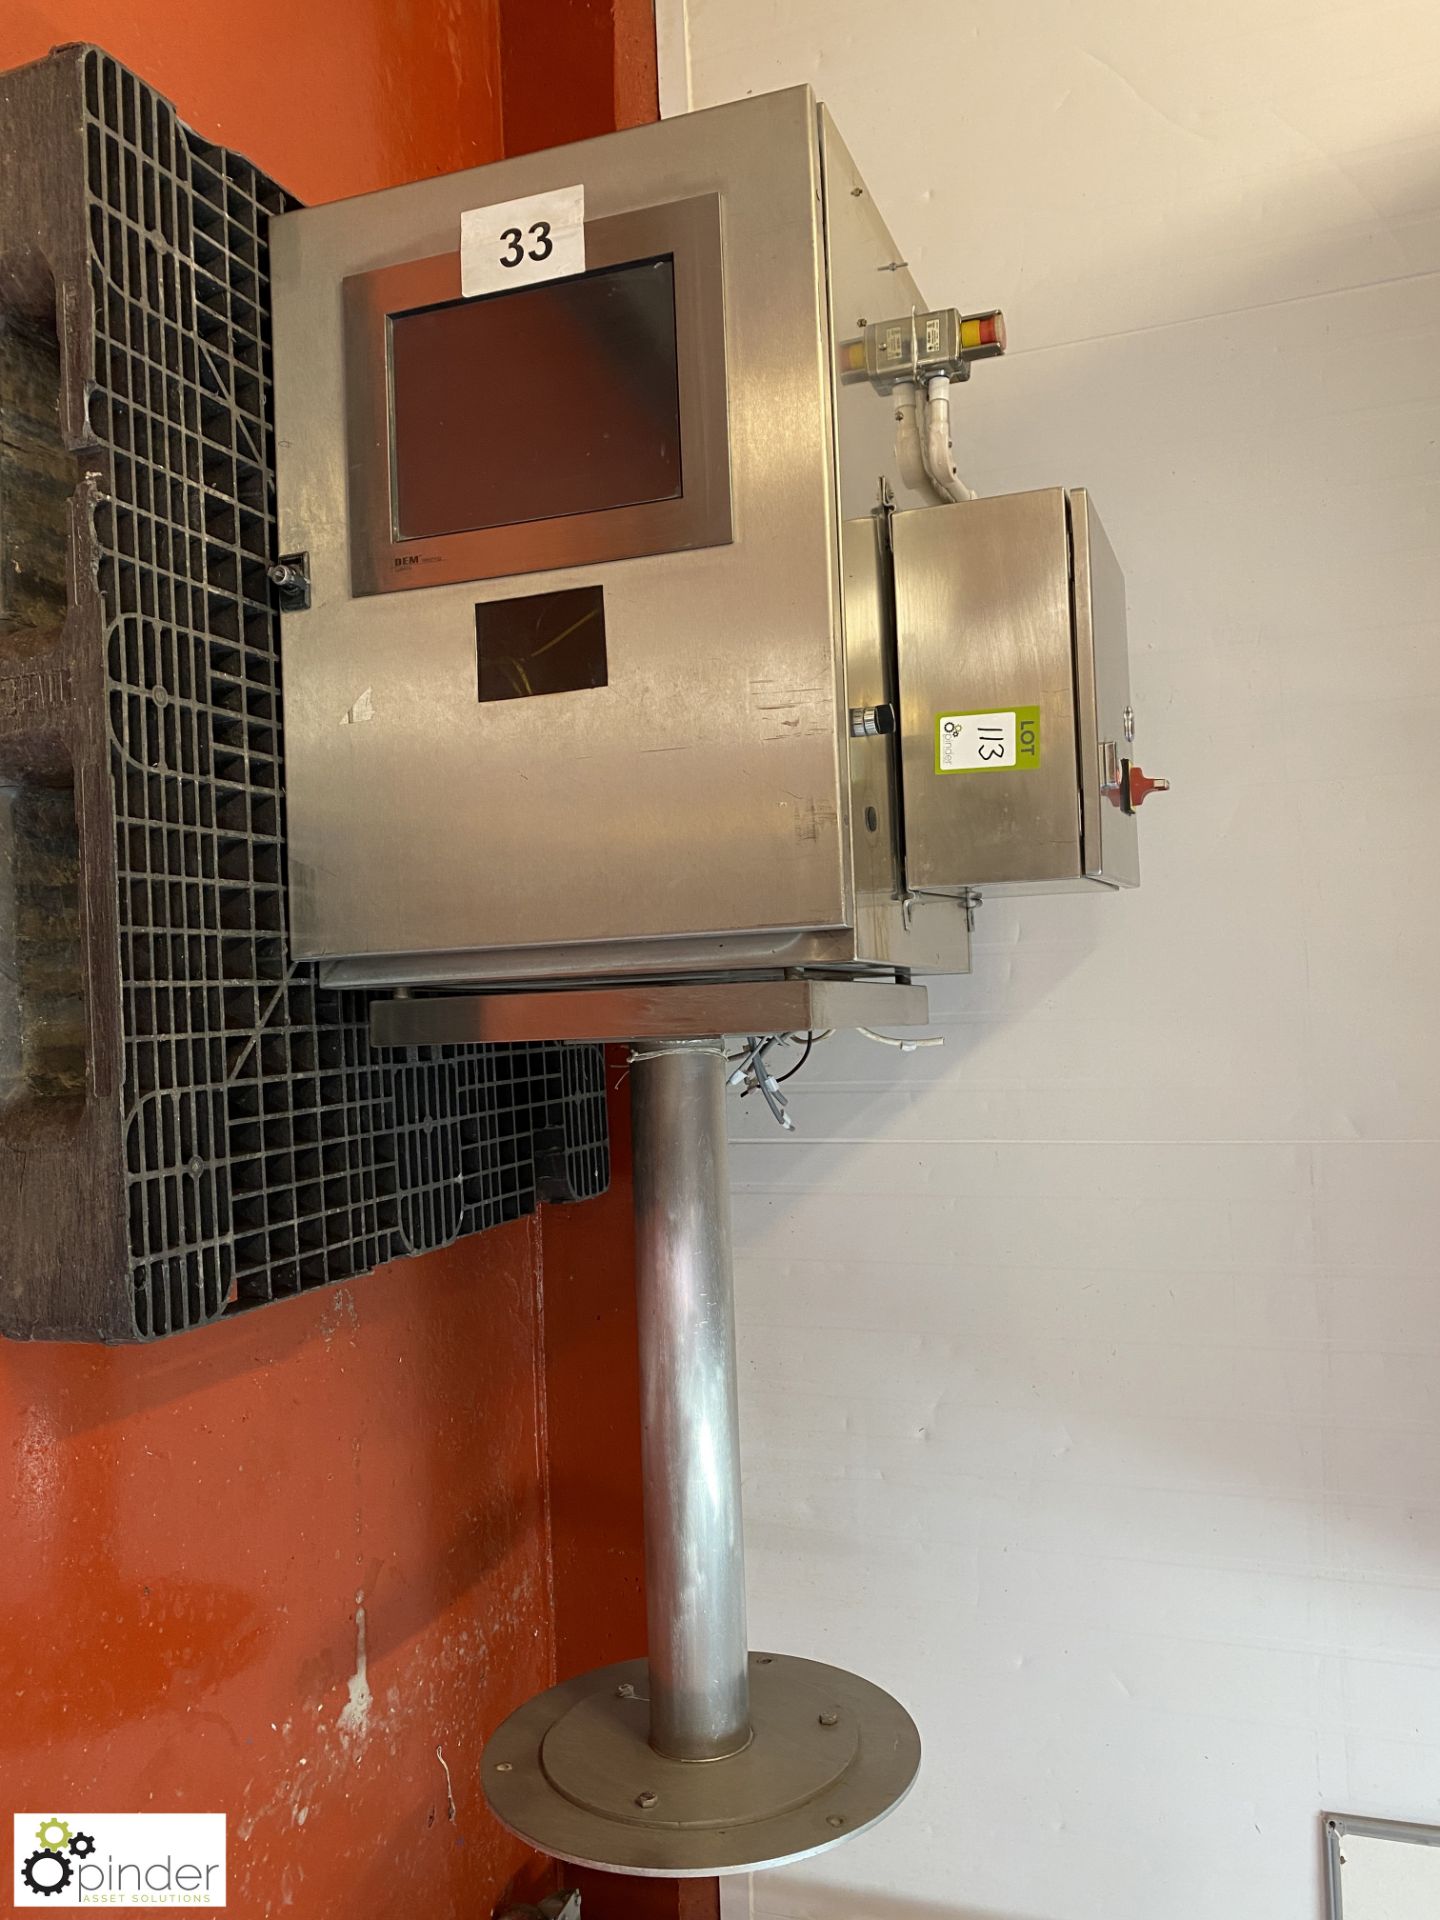 DEM stainless steel Control Box, for weighing system (Lift Out Fee: £5 plus VAT)